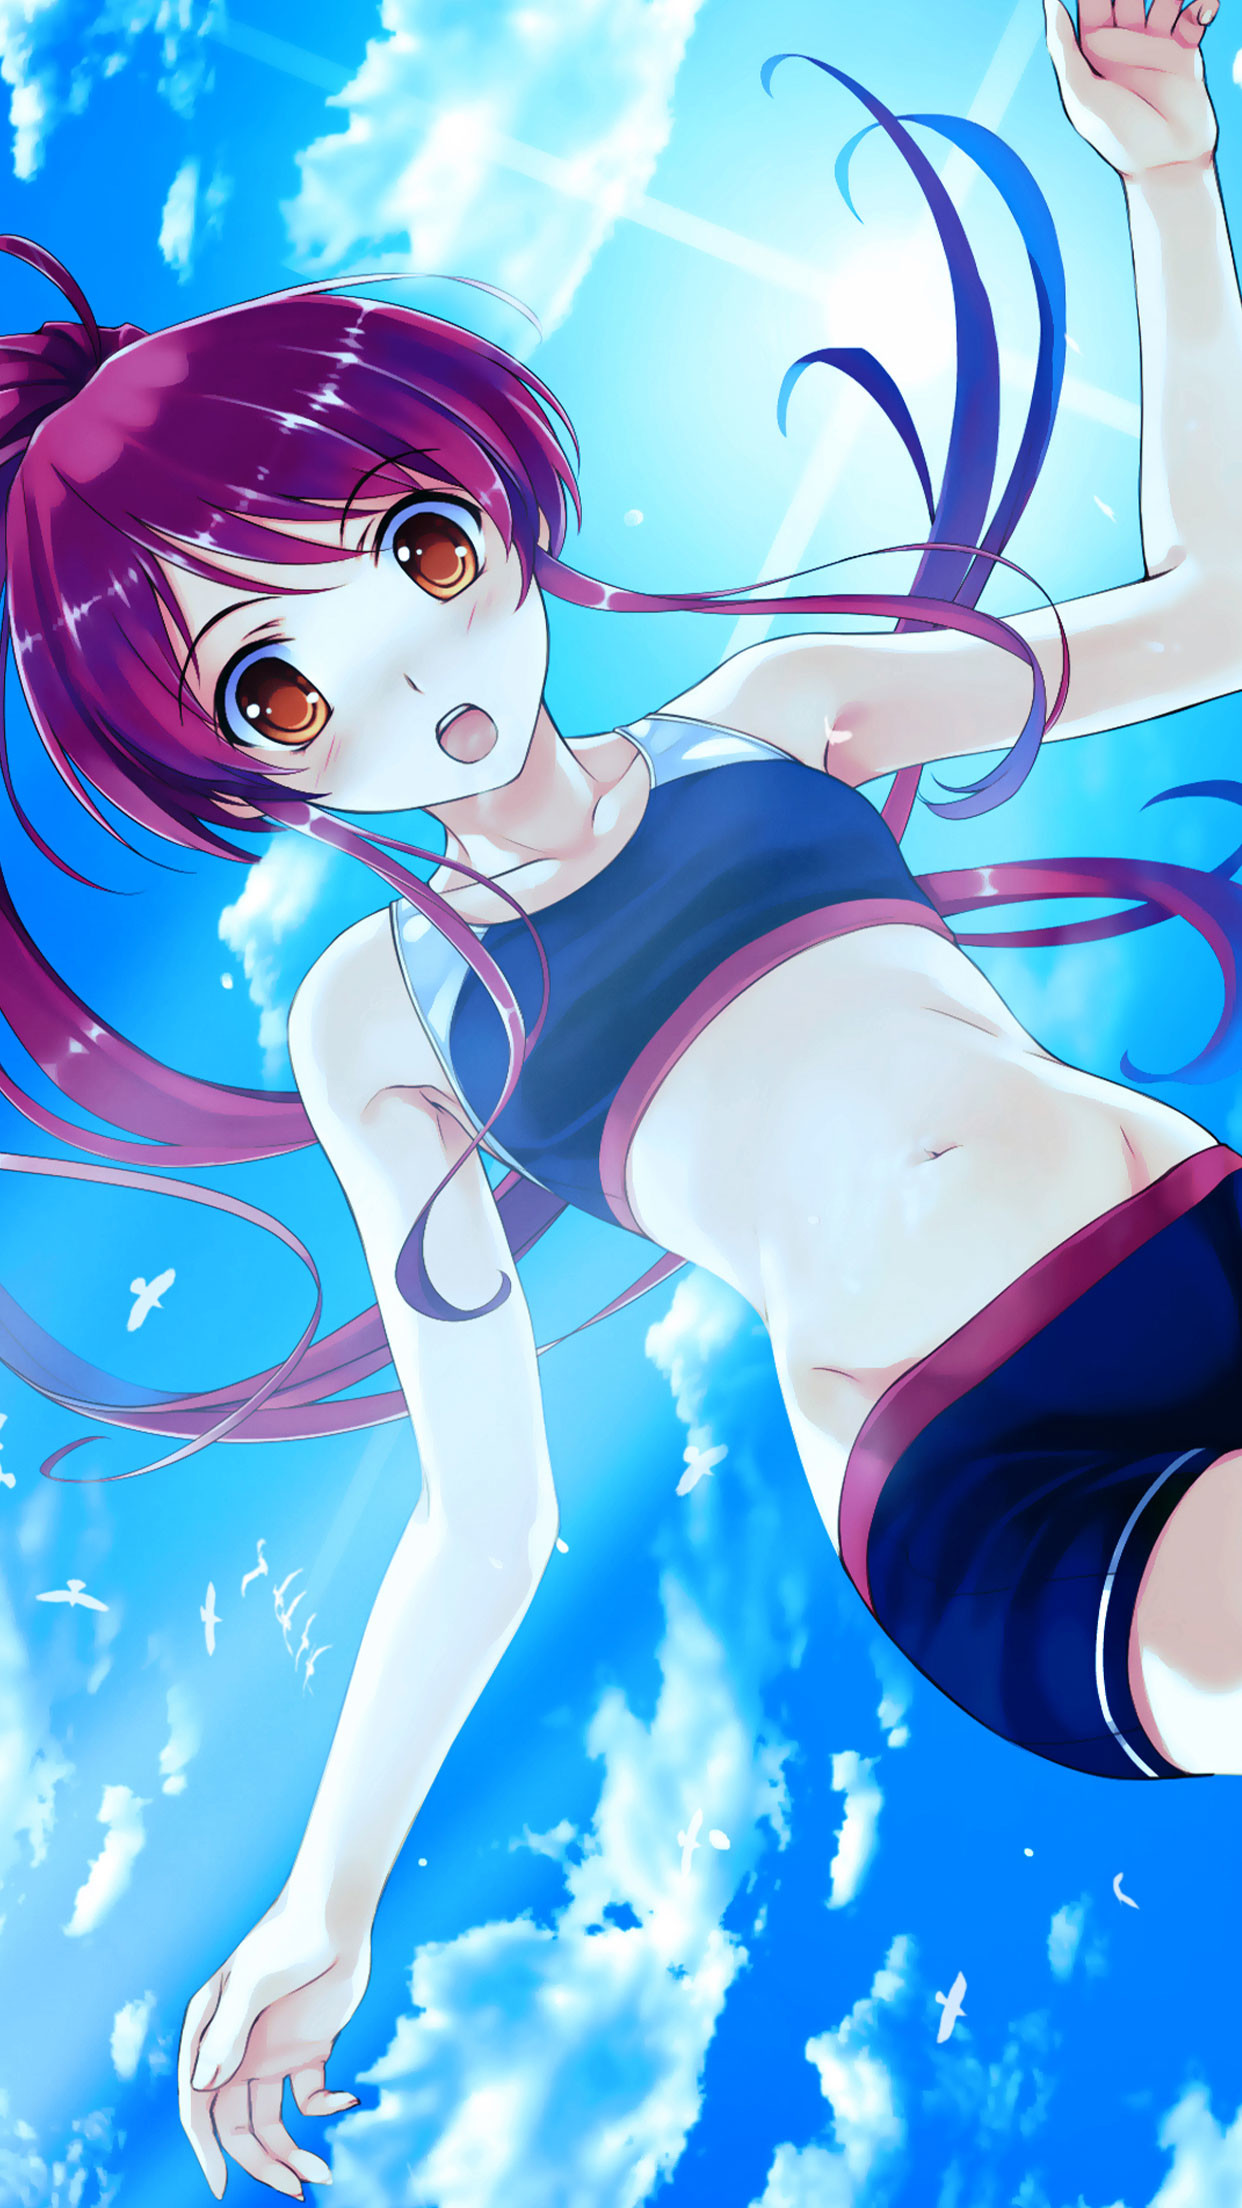 Anime girl wallpaper for #Iphone and #Android #anime #girl #wallpaper more